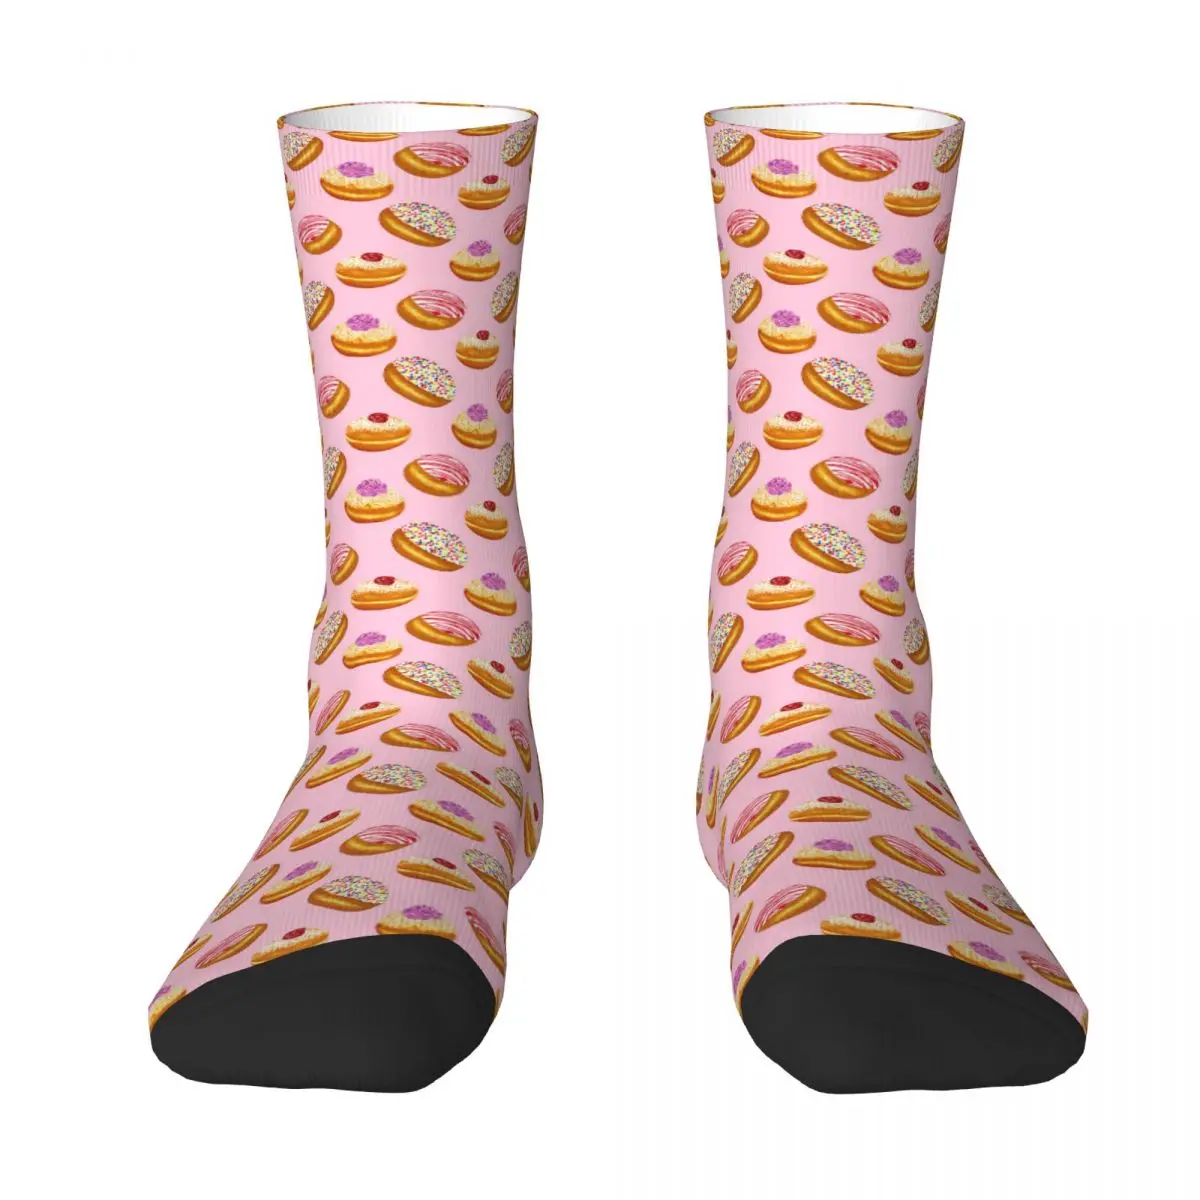 Hand Drawn Watercolor Seamless Pattern Of Colorful Donuts Adult Socks,Unisex socks,men Socks women Socks watercolor painting introductory tutorial books aquarela coloring technique books antiquity characters hand drawn painting album